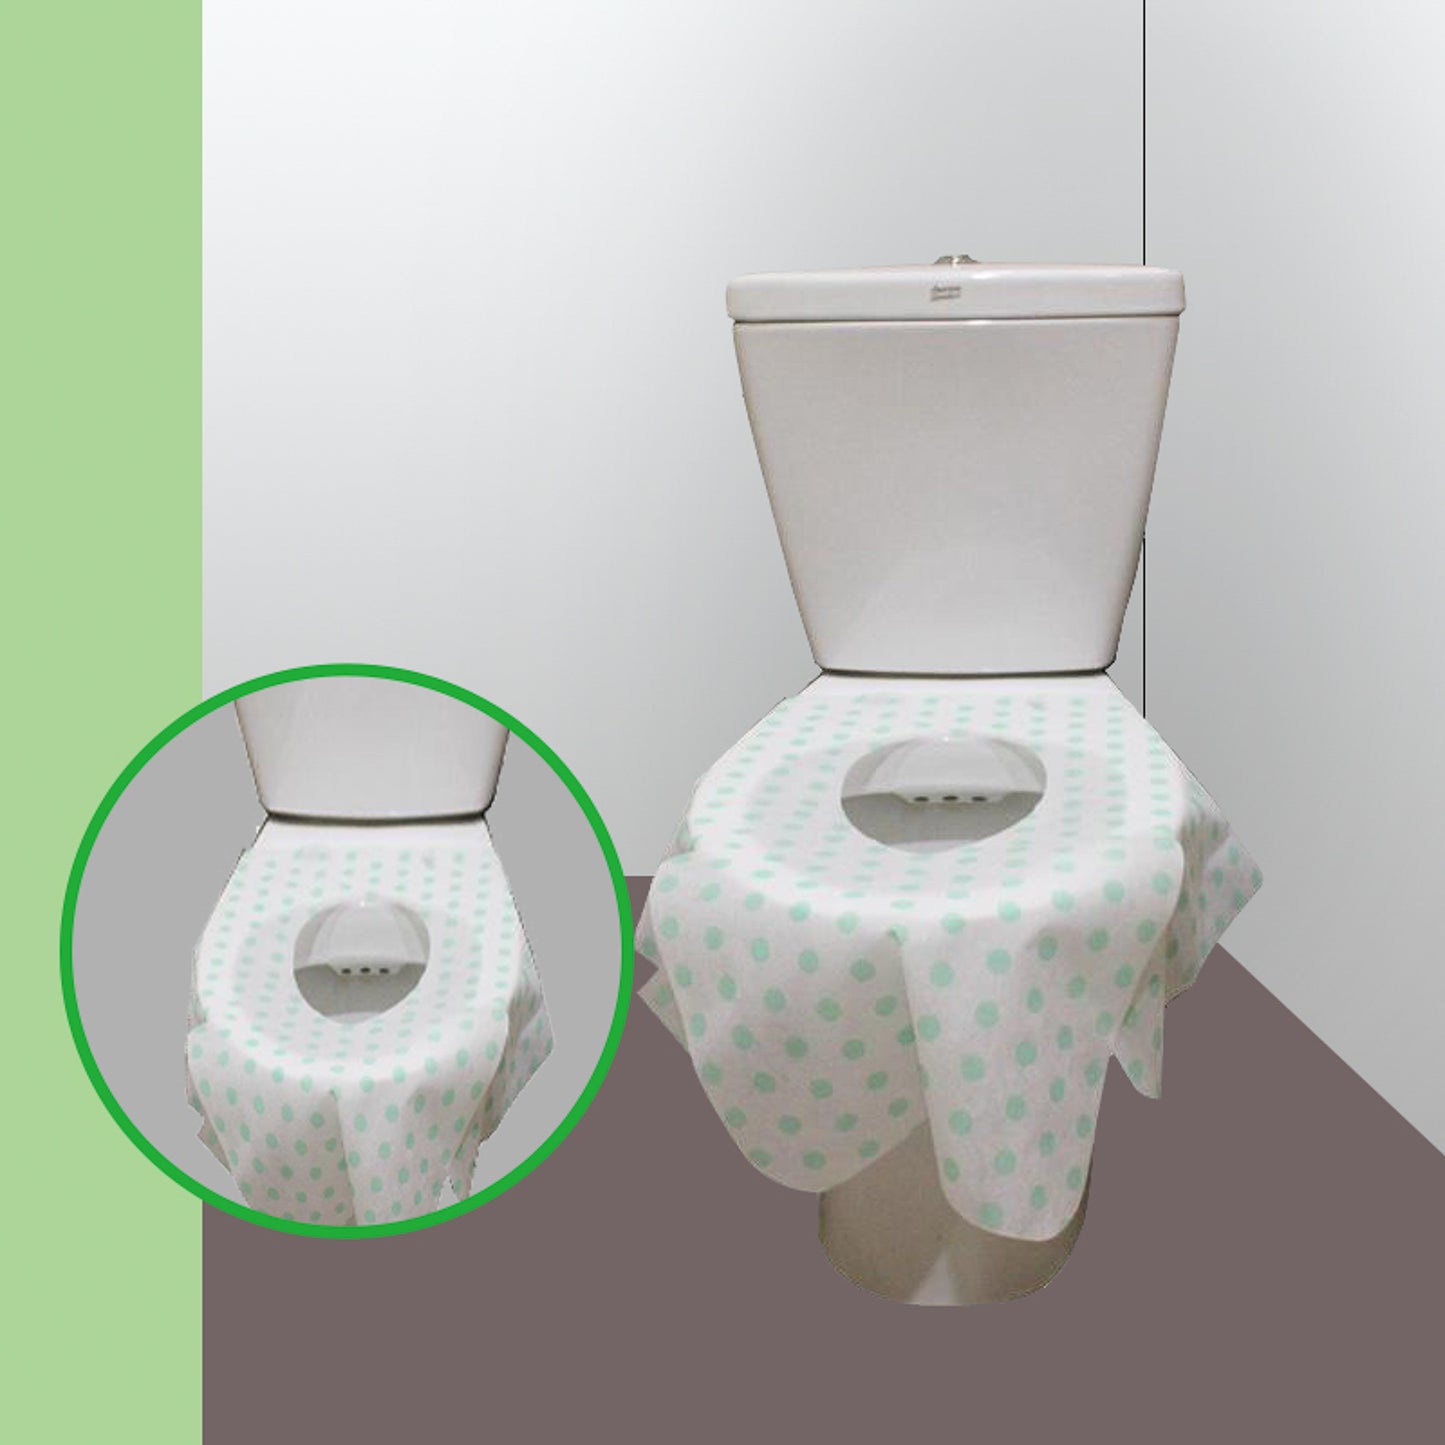 Disposable Toilet Seat Covers - 20ct